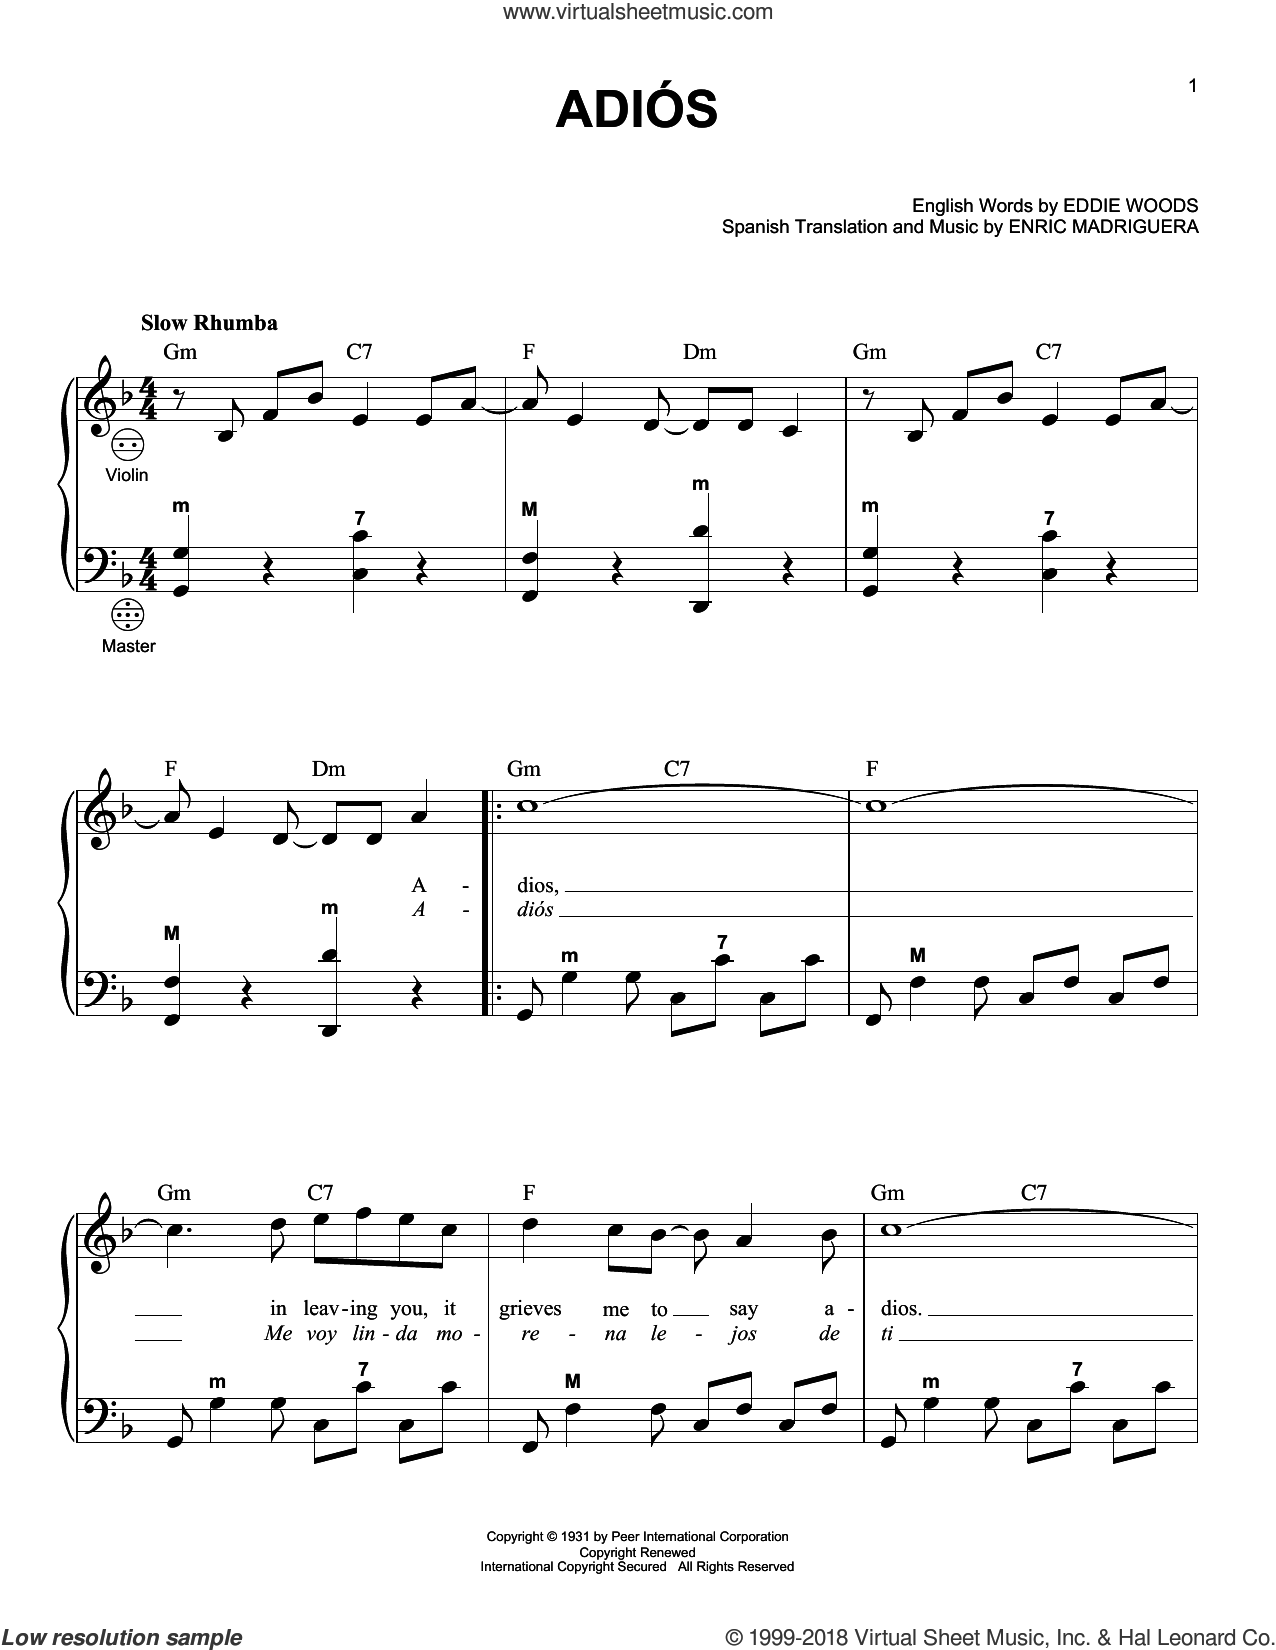 La Vie En Rose (Take Me To Your Heart Again) (arr. Gary Meisner) sheet  music for accordion